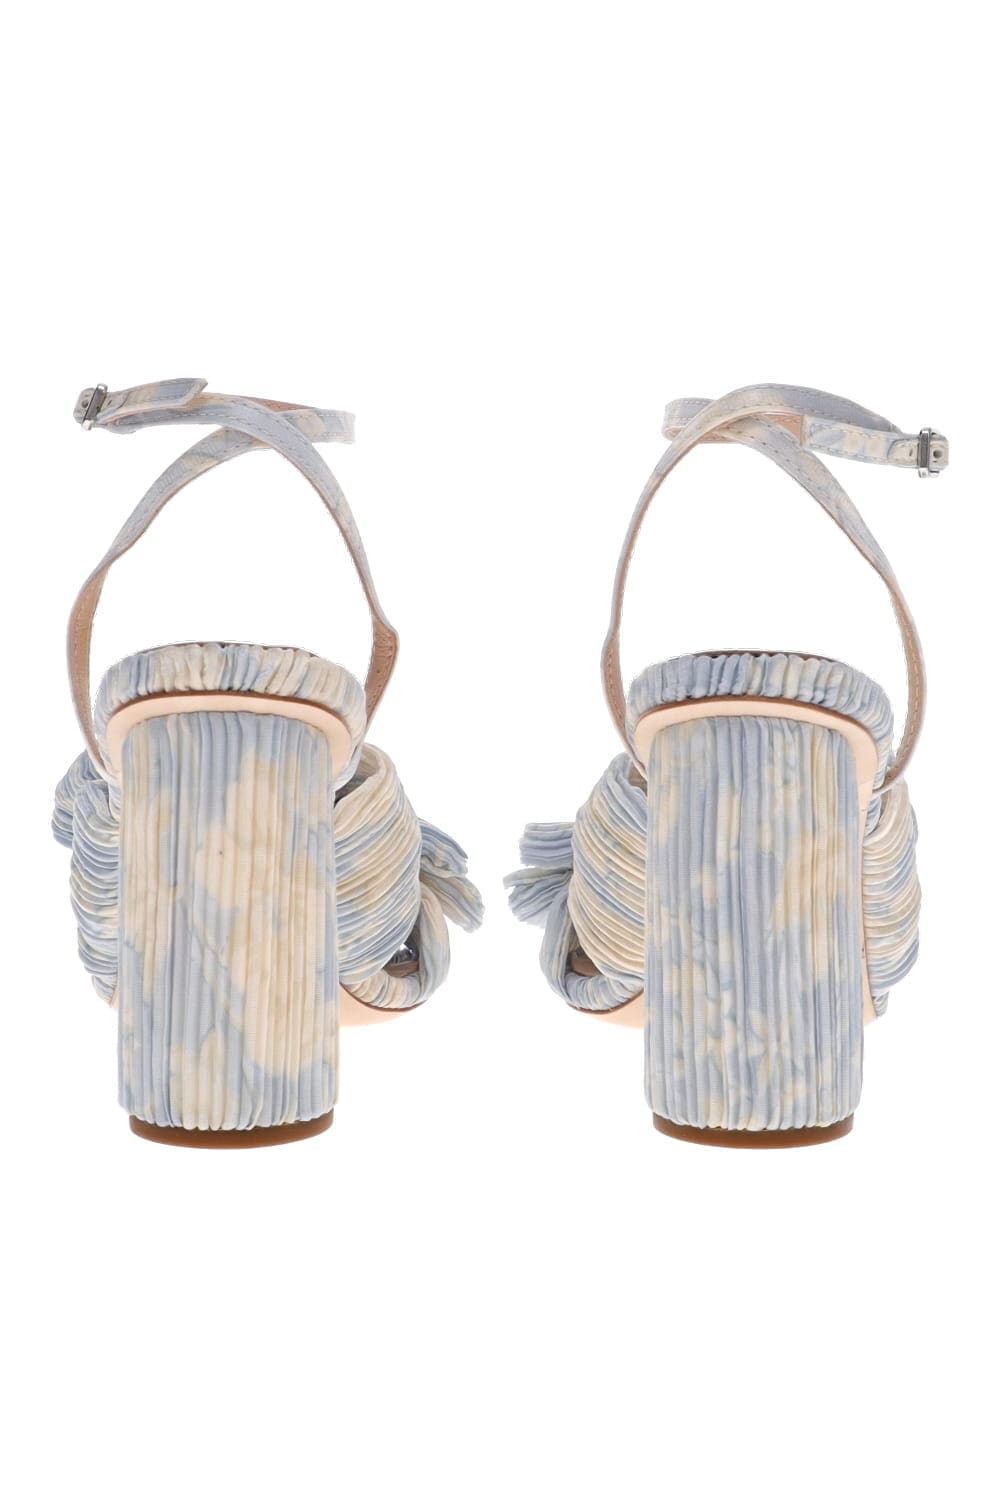 Loeffler Randall CAMELLIA PLEATED KNOT HEELED SANDAL WITH ANKLE STRAP CAMELLIA-PLFA-DUSBF Dusty Blue Floral